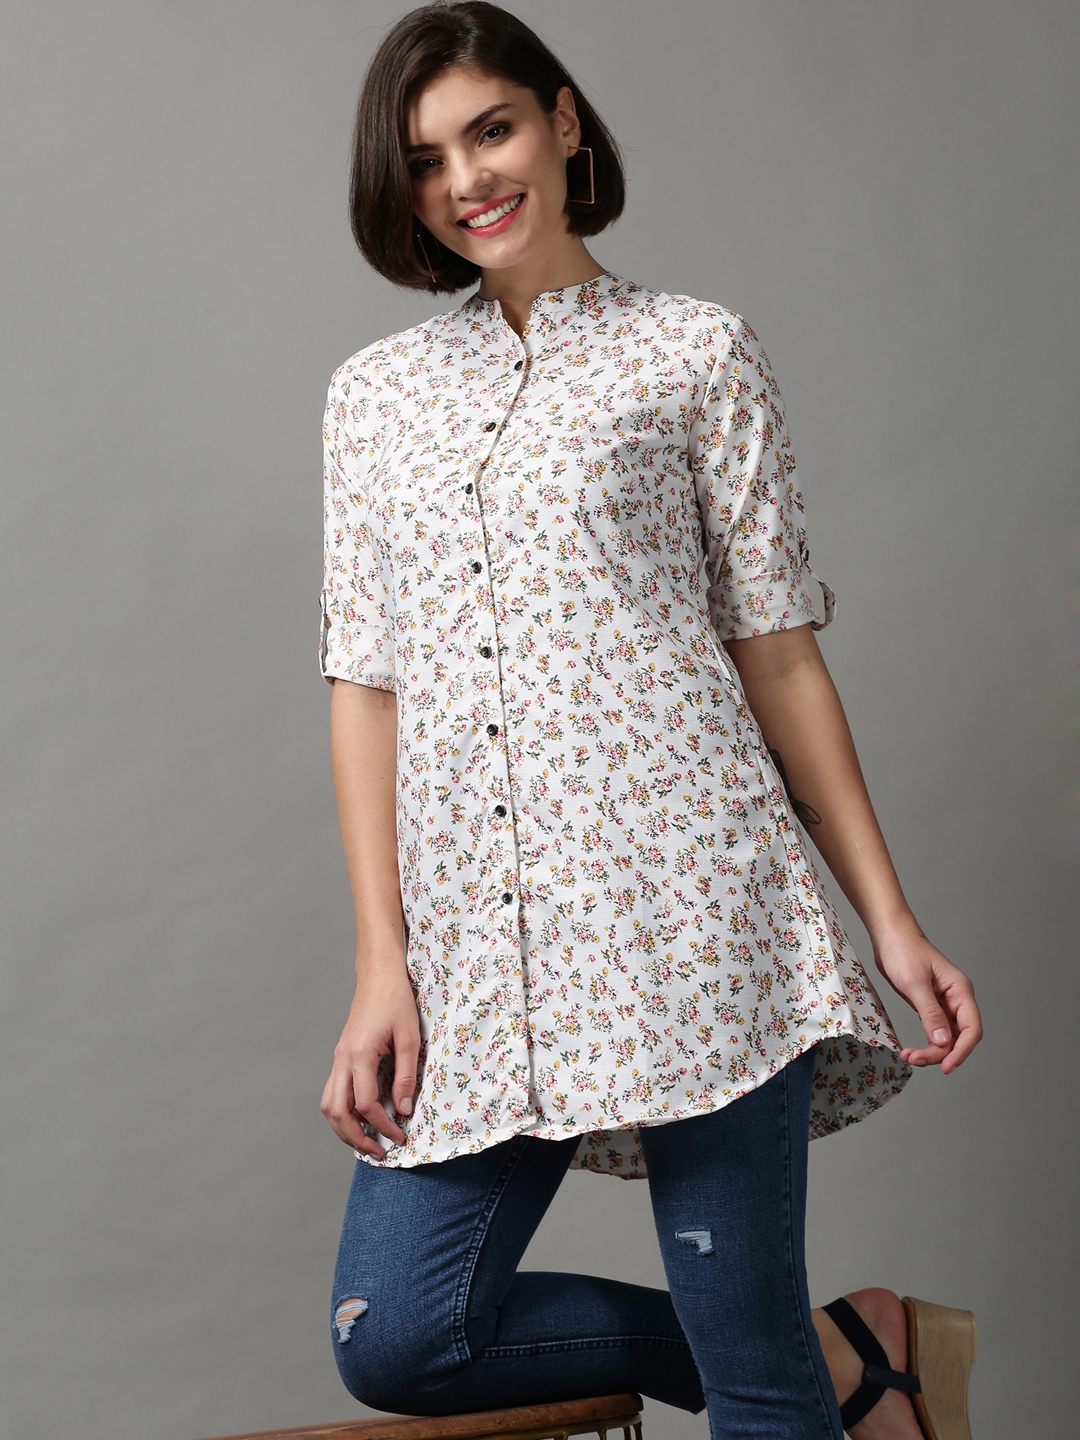 Women's White Polyester Printed Casual Shirts